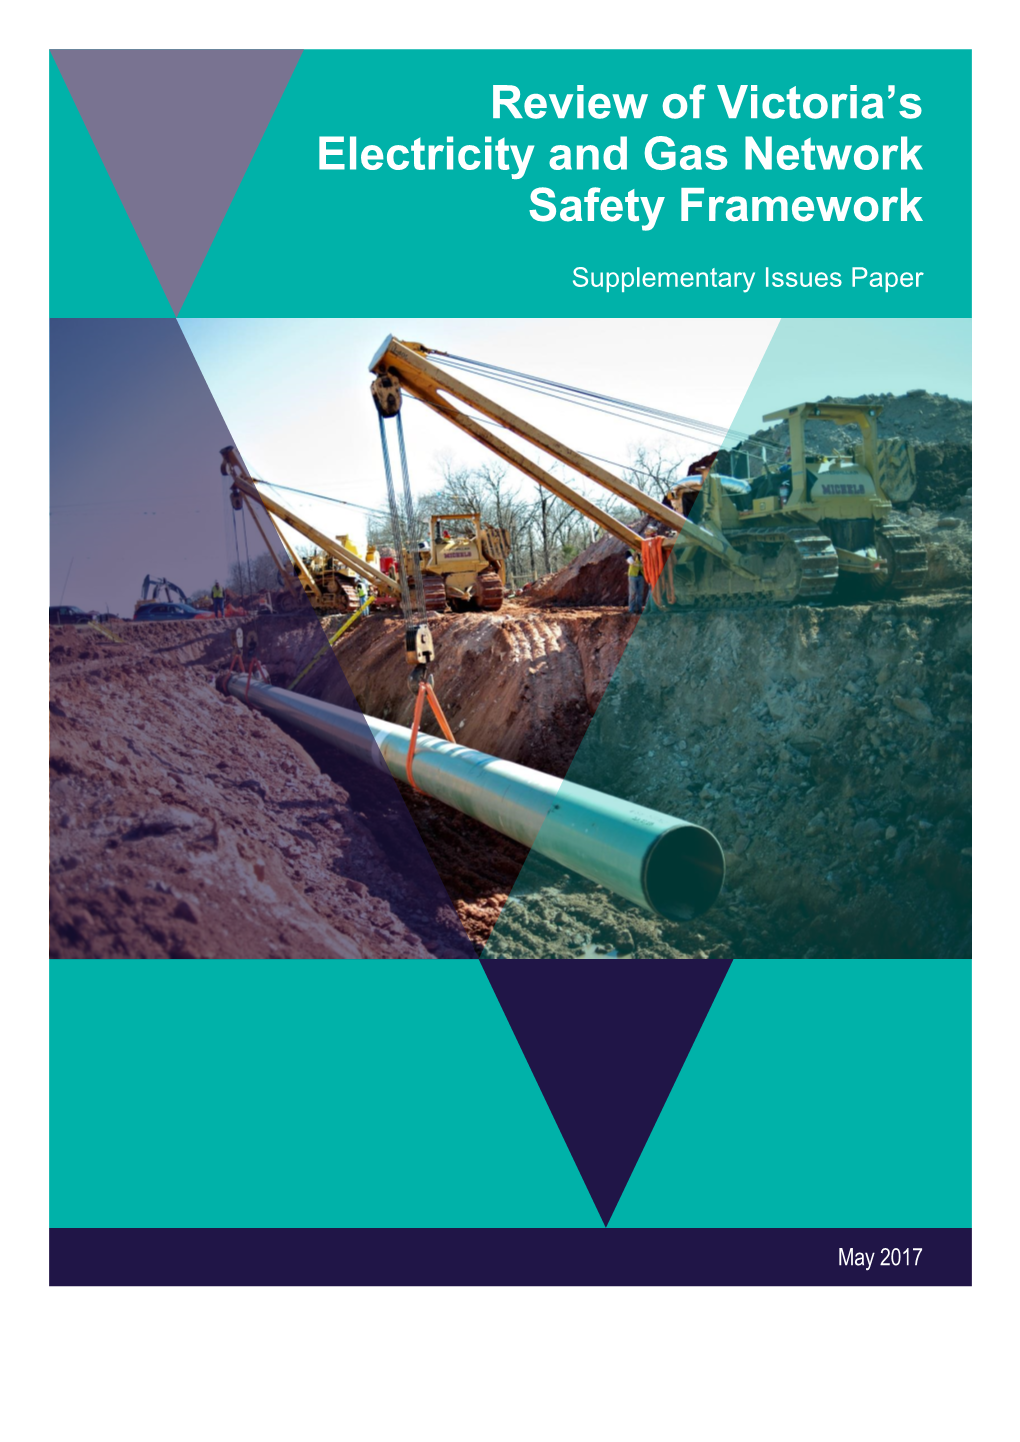 Review of Victoria's Electricity and Gas Network Safety Framework